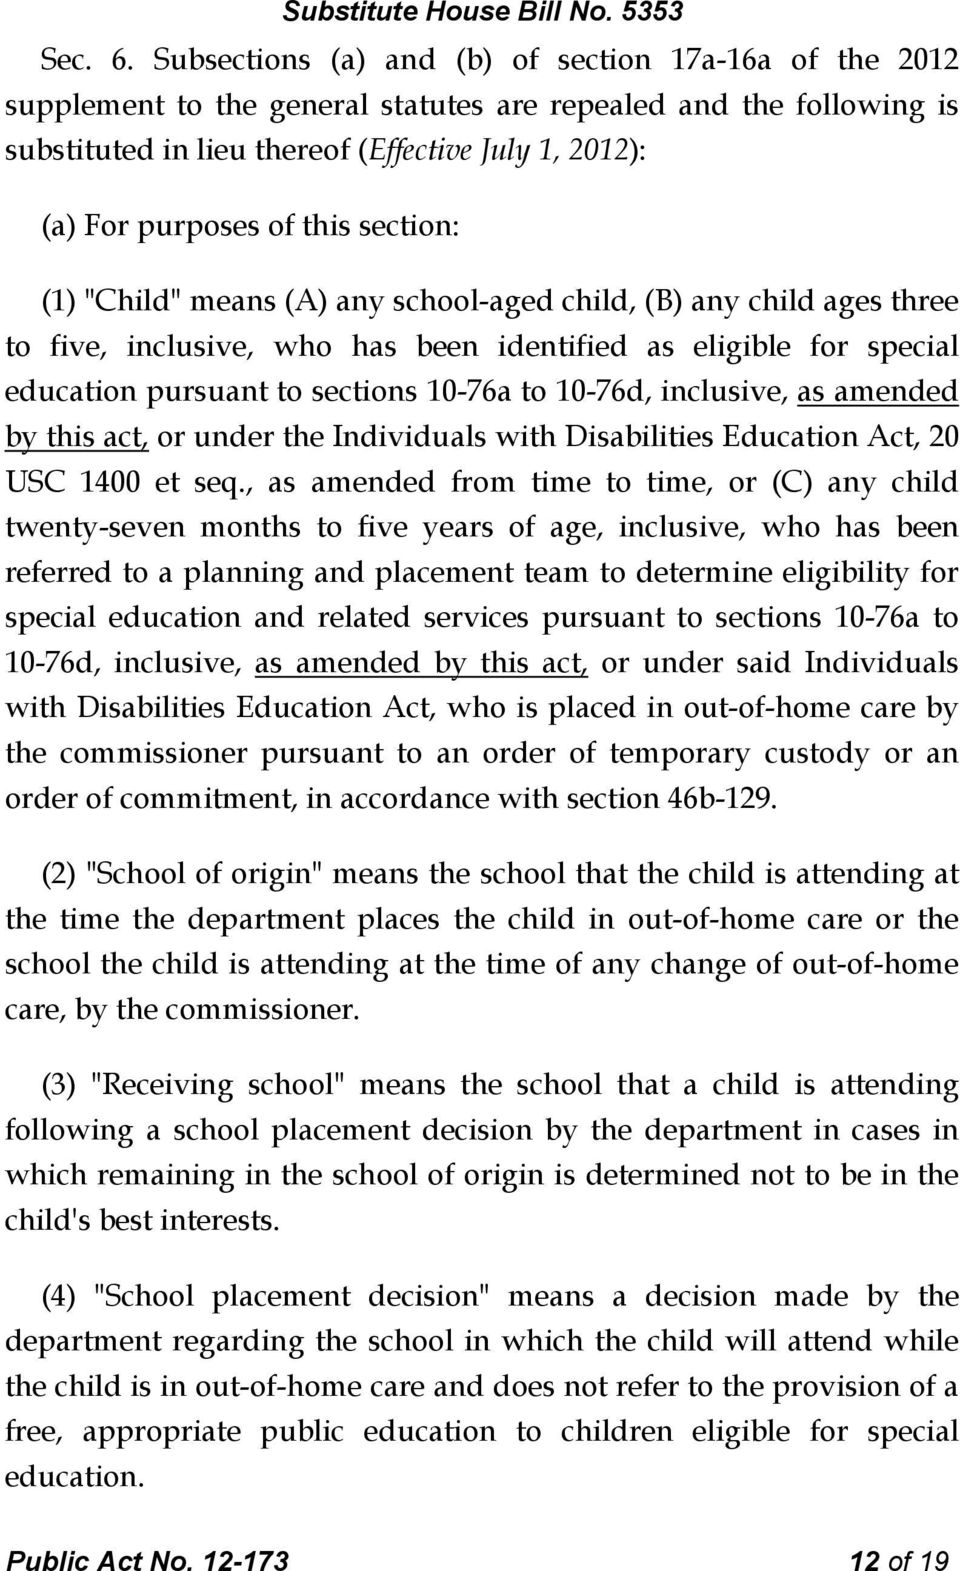 this section: (1) "Child" means (A) any school-aged child, (B) any child ages three to five, inclusive, who has been identified as eligible for special education pursuant to sections 10-76a to